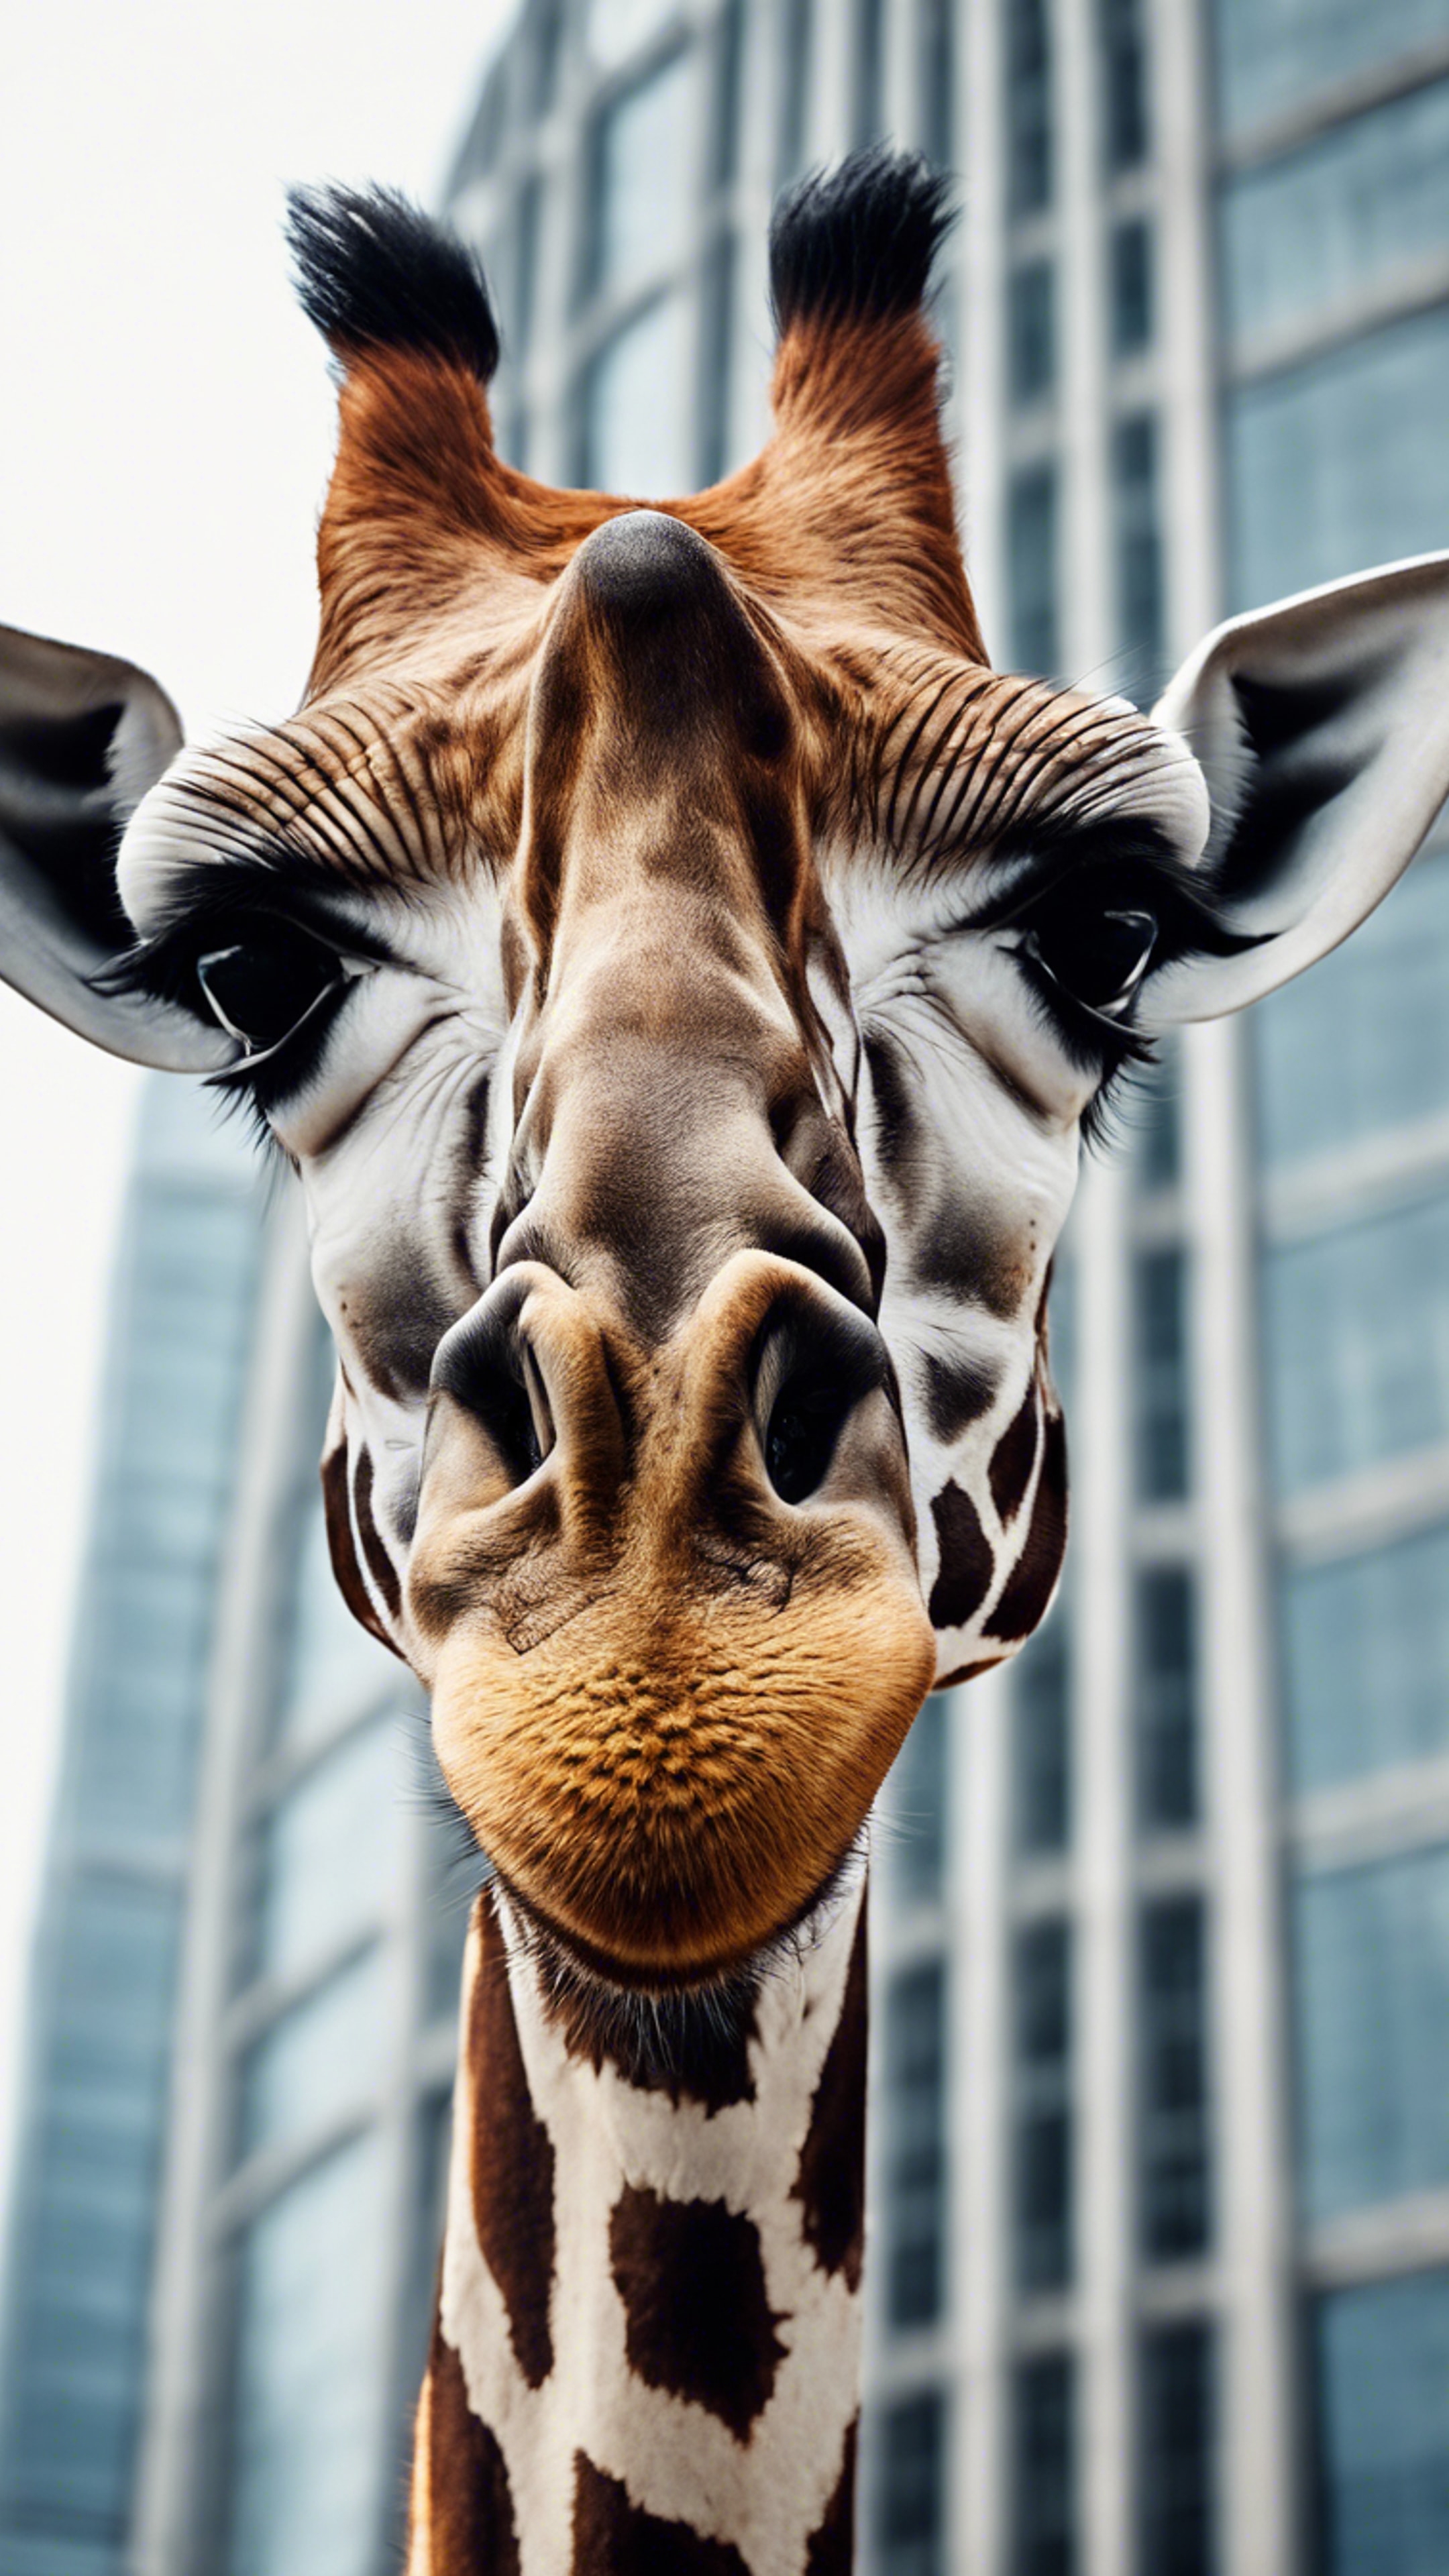 A giraffe in an urban setting, poking its head out from behind a skyscraper, symbolising wild nature confronting urbanisation. Тапет[4646bbcdc786429d9f19]